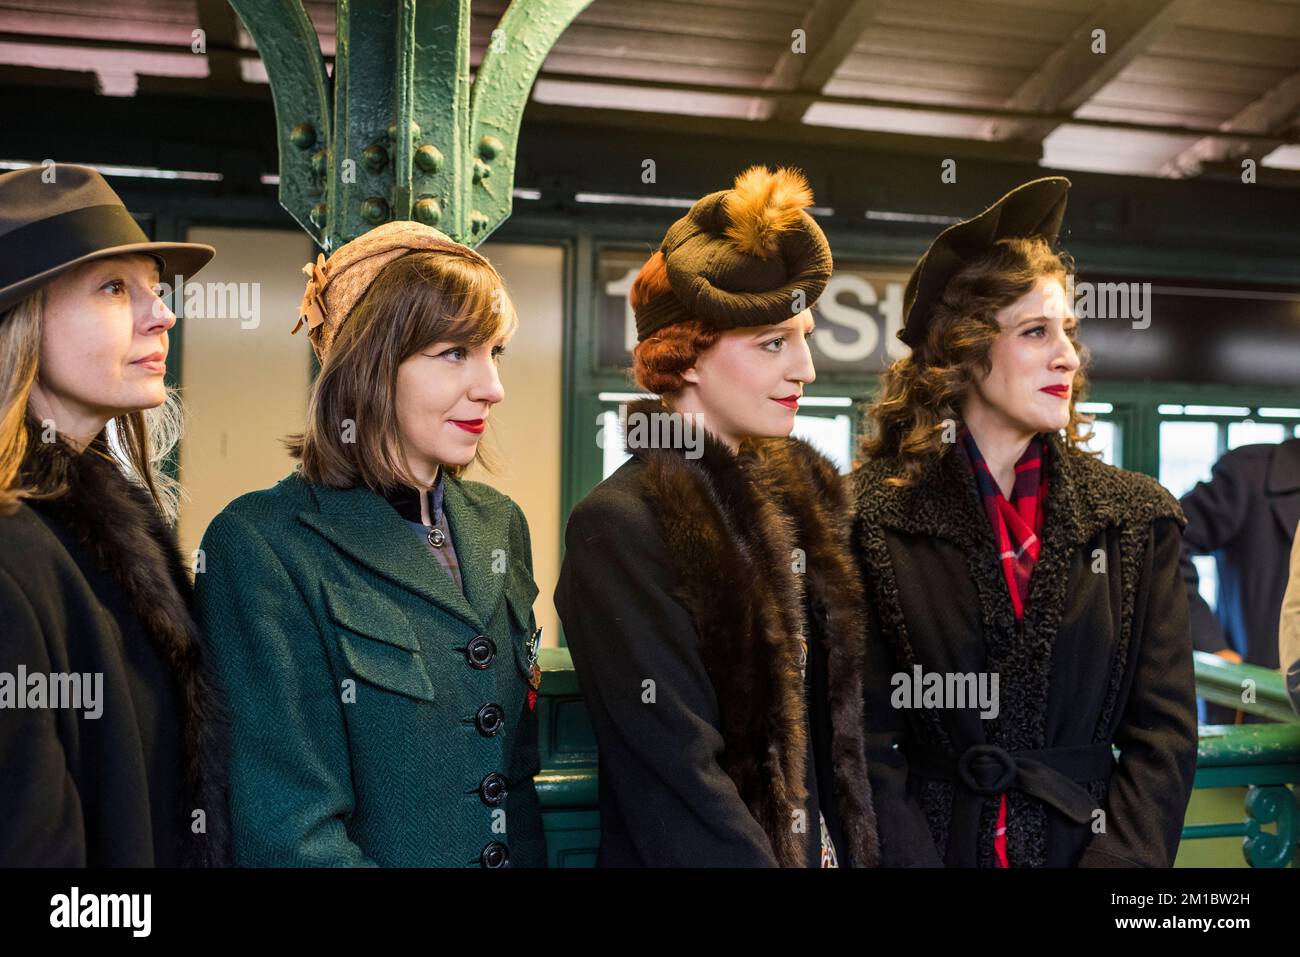 New York City, New York - December 11, 2022: People in period clothing waiting for the Train of Many Colors, Holiday Nostalgia Rides, NYC Subway Stock Photo